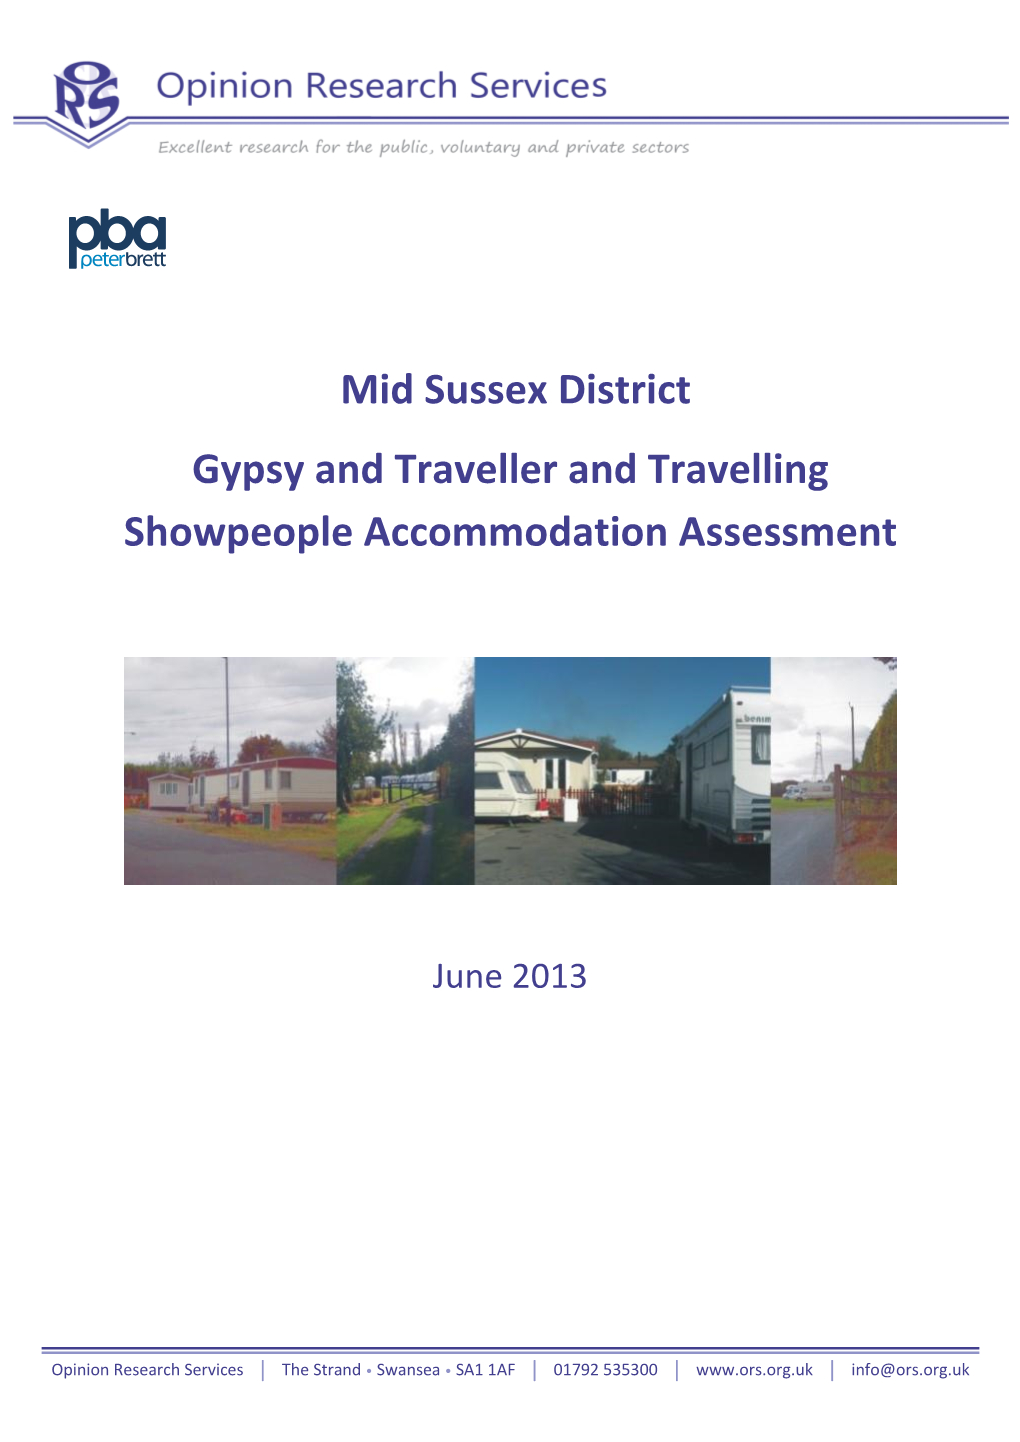 Mid Sussex District Gypsy and Traveller and Travelling Showpeople Accommodation Assessment